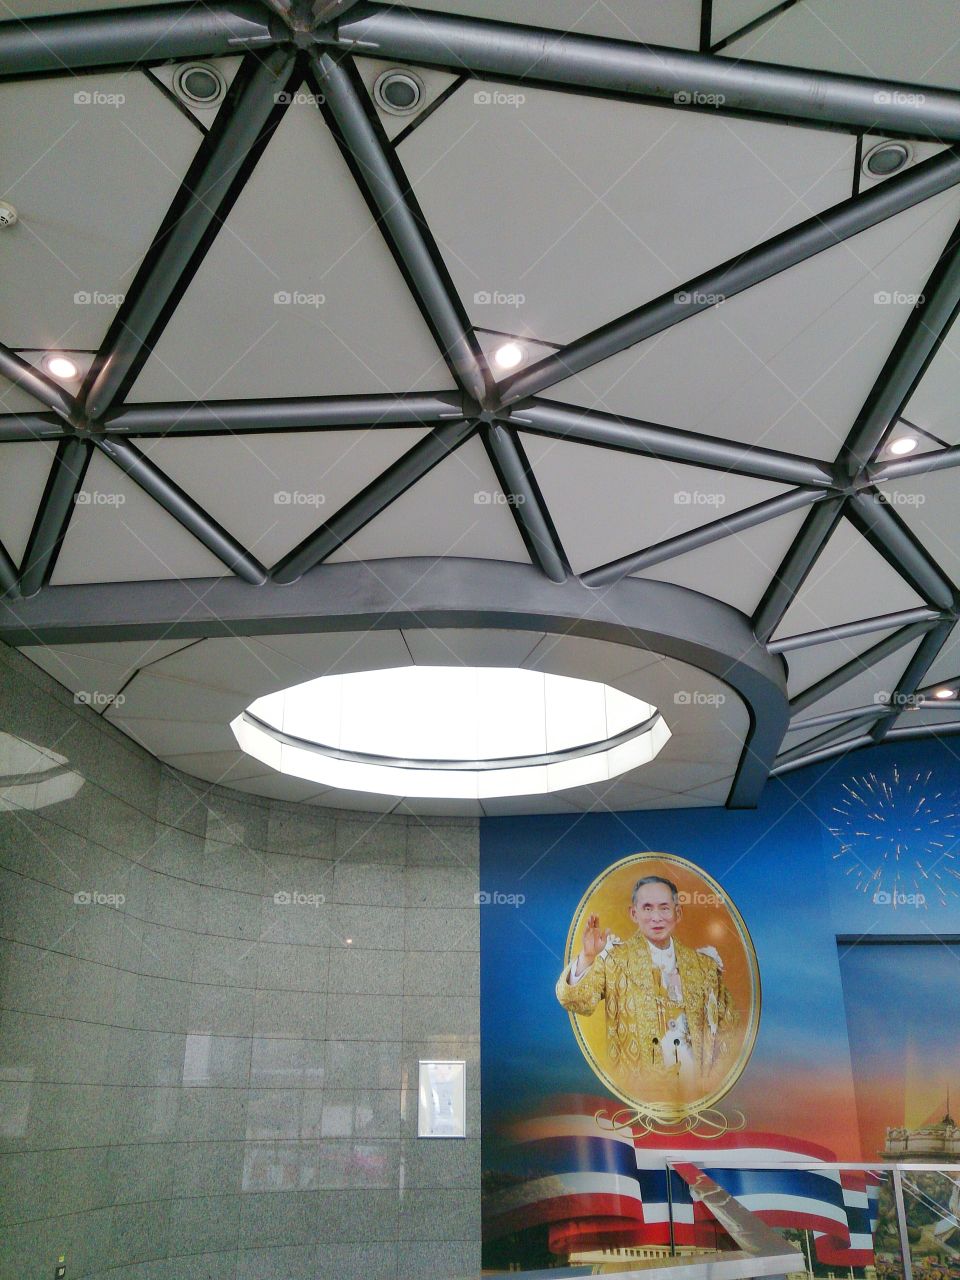 Crown. This photo was taken at the Hua Lamphong MRT Station.